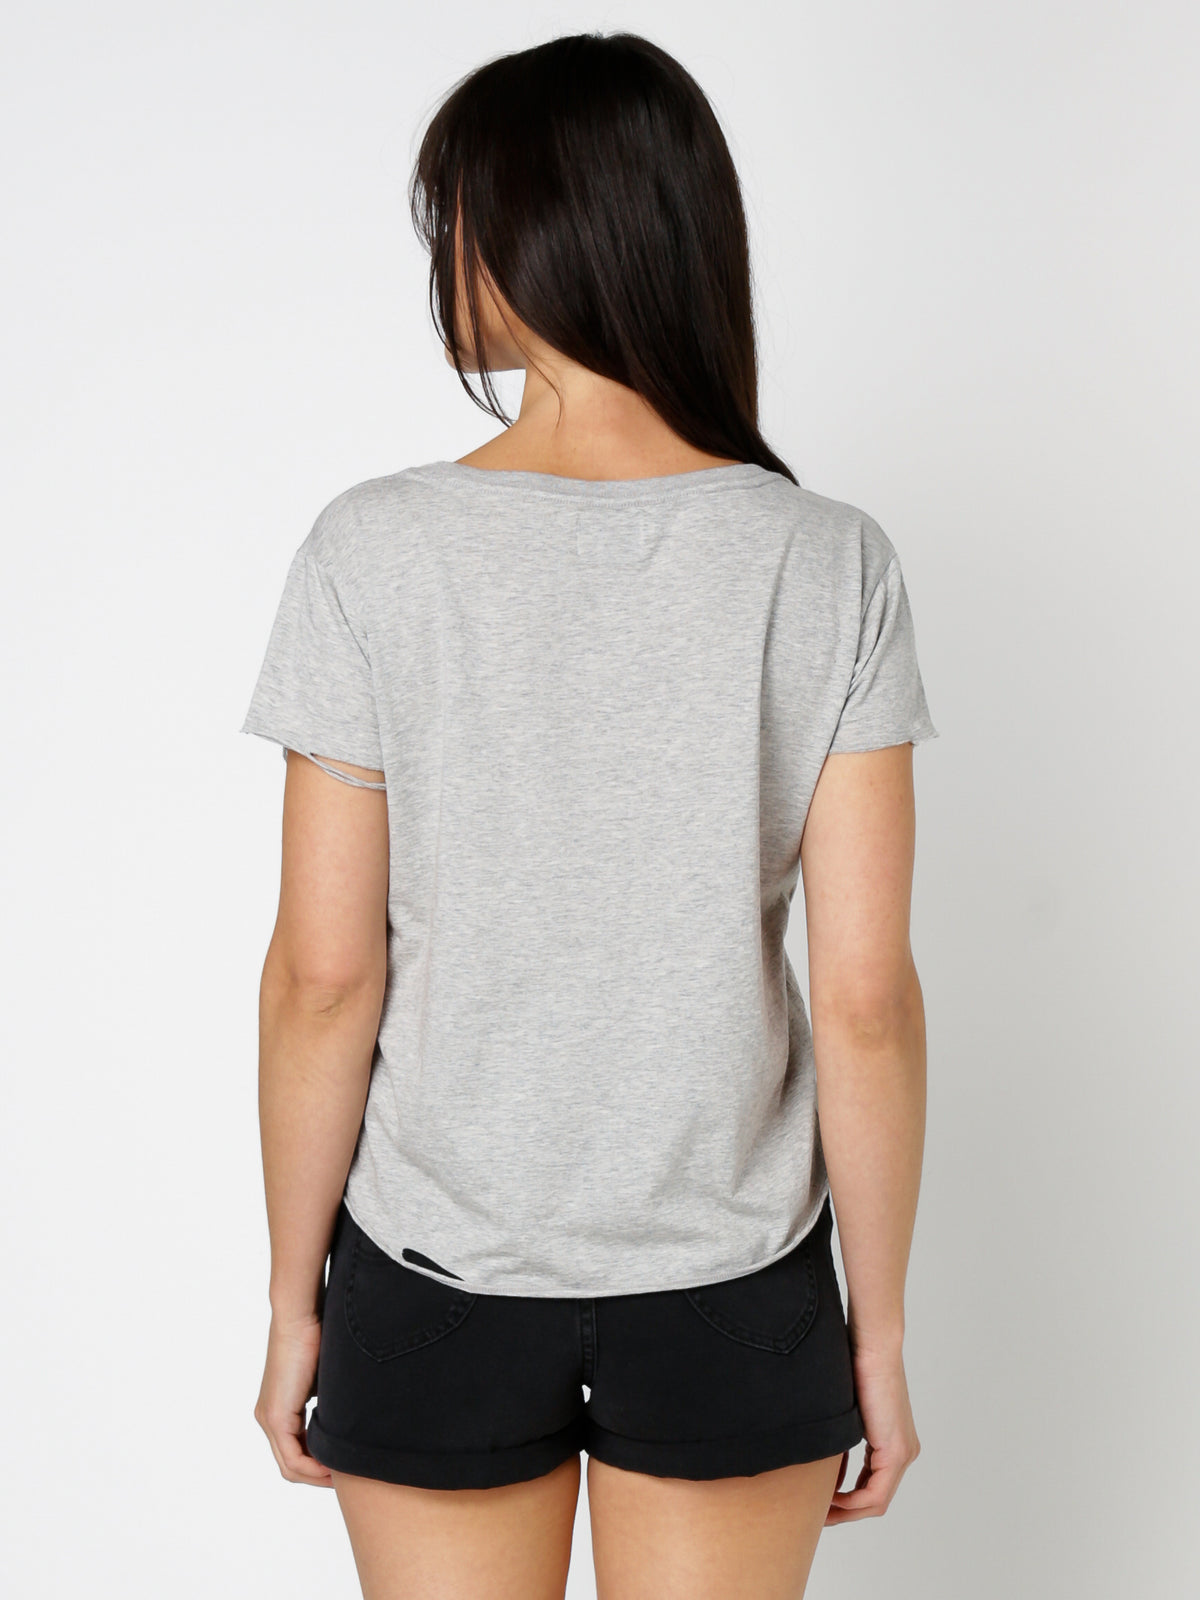 Salty Distressed Cap Sleeve T-Shirt in Grey Marle